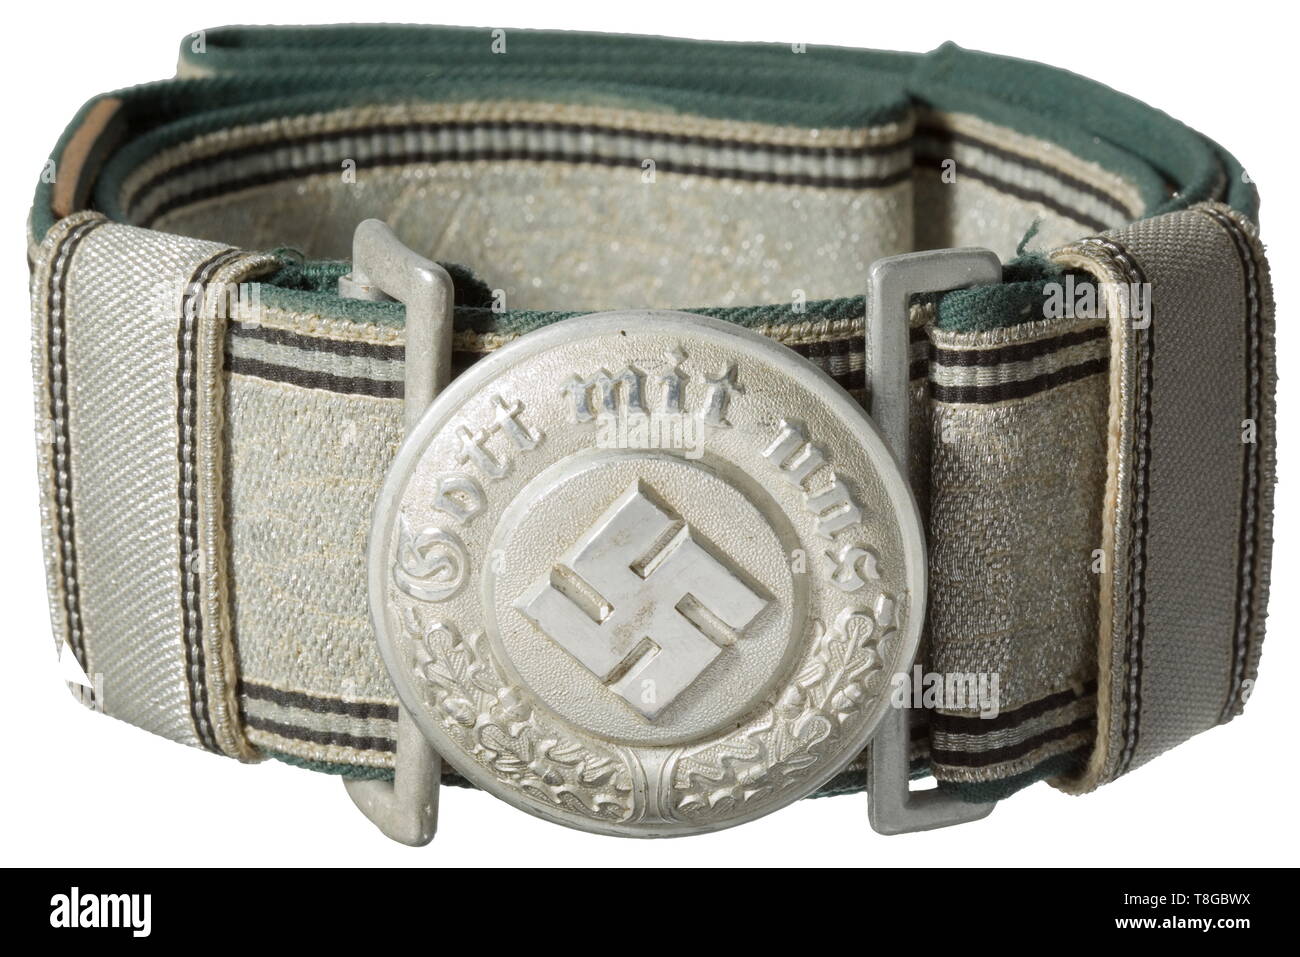 A parade waist belt for leaders Waist belt buckle of silver-plated aluminium, with polished edges. The belt of spun aluminium (somewhat migrated) with woven-in runes and oak leaves, the reverse underlay in green cloth. Complete with both slides. historic, historical, 20th century, Additional-Rights-Clearance-Info-Not-Available Stock Photo